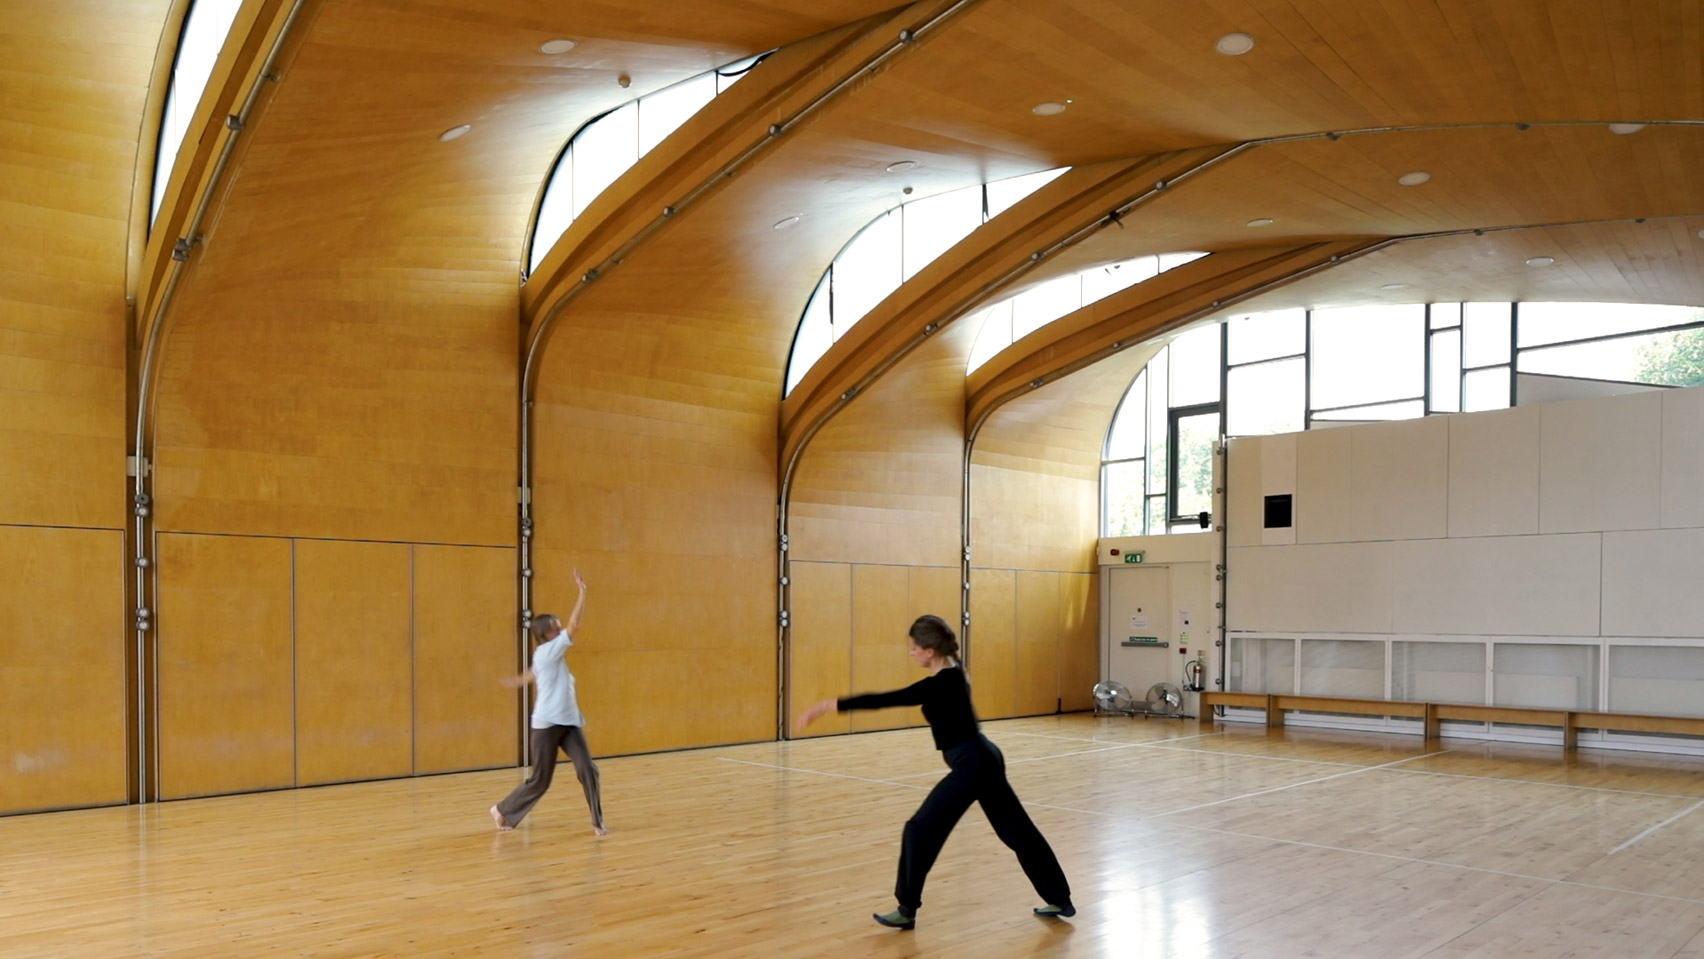 Undulating roof of Siobhan Davies Dance Studio echoes movements of its users